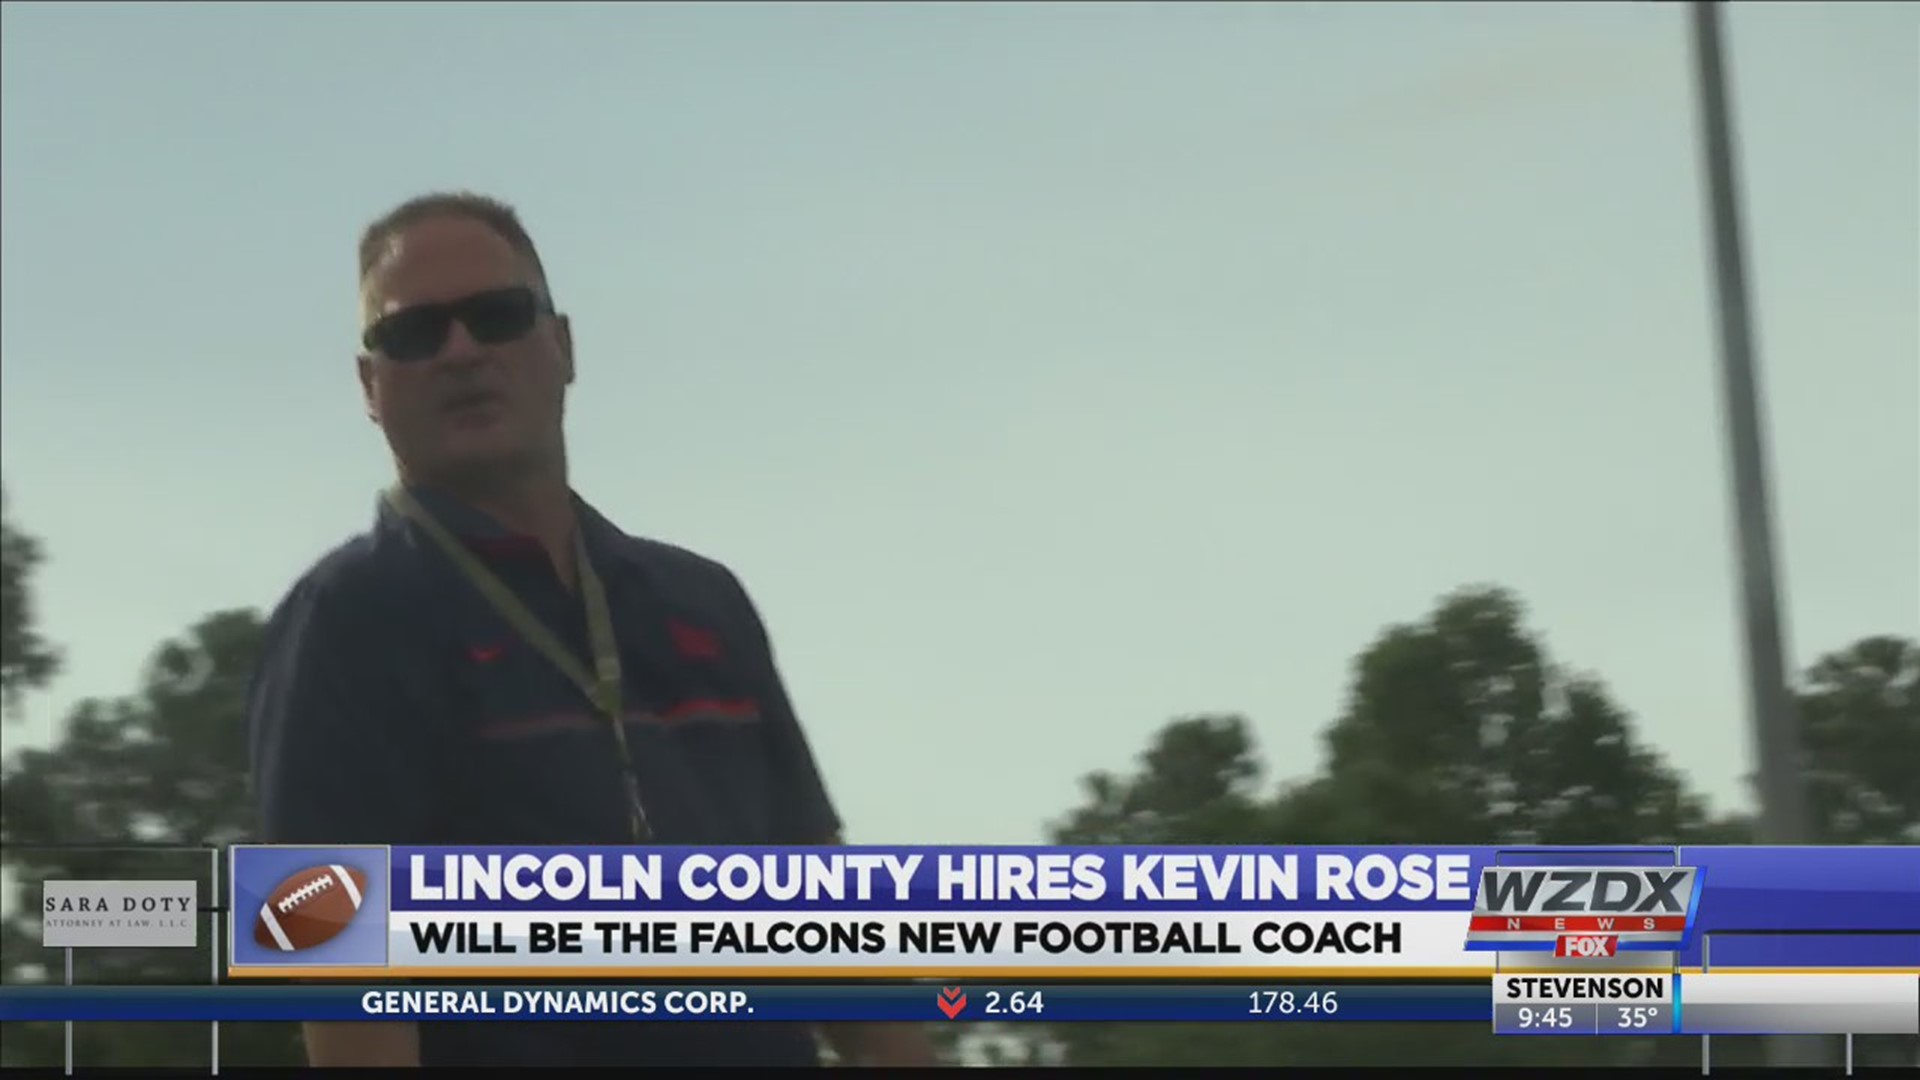 Longtime Bob Jones head coach Kevin Rose will retire from the Alabama Public School System and become the new head football coach at Lincoln County in Fayetteville, Tennessee.